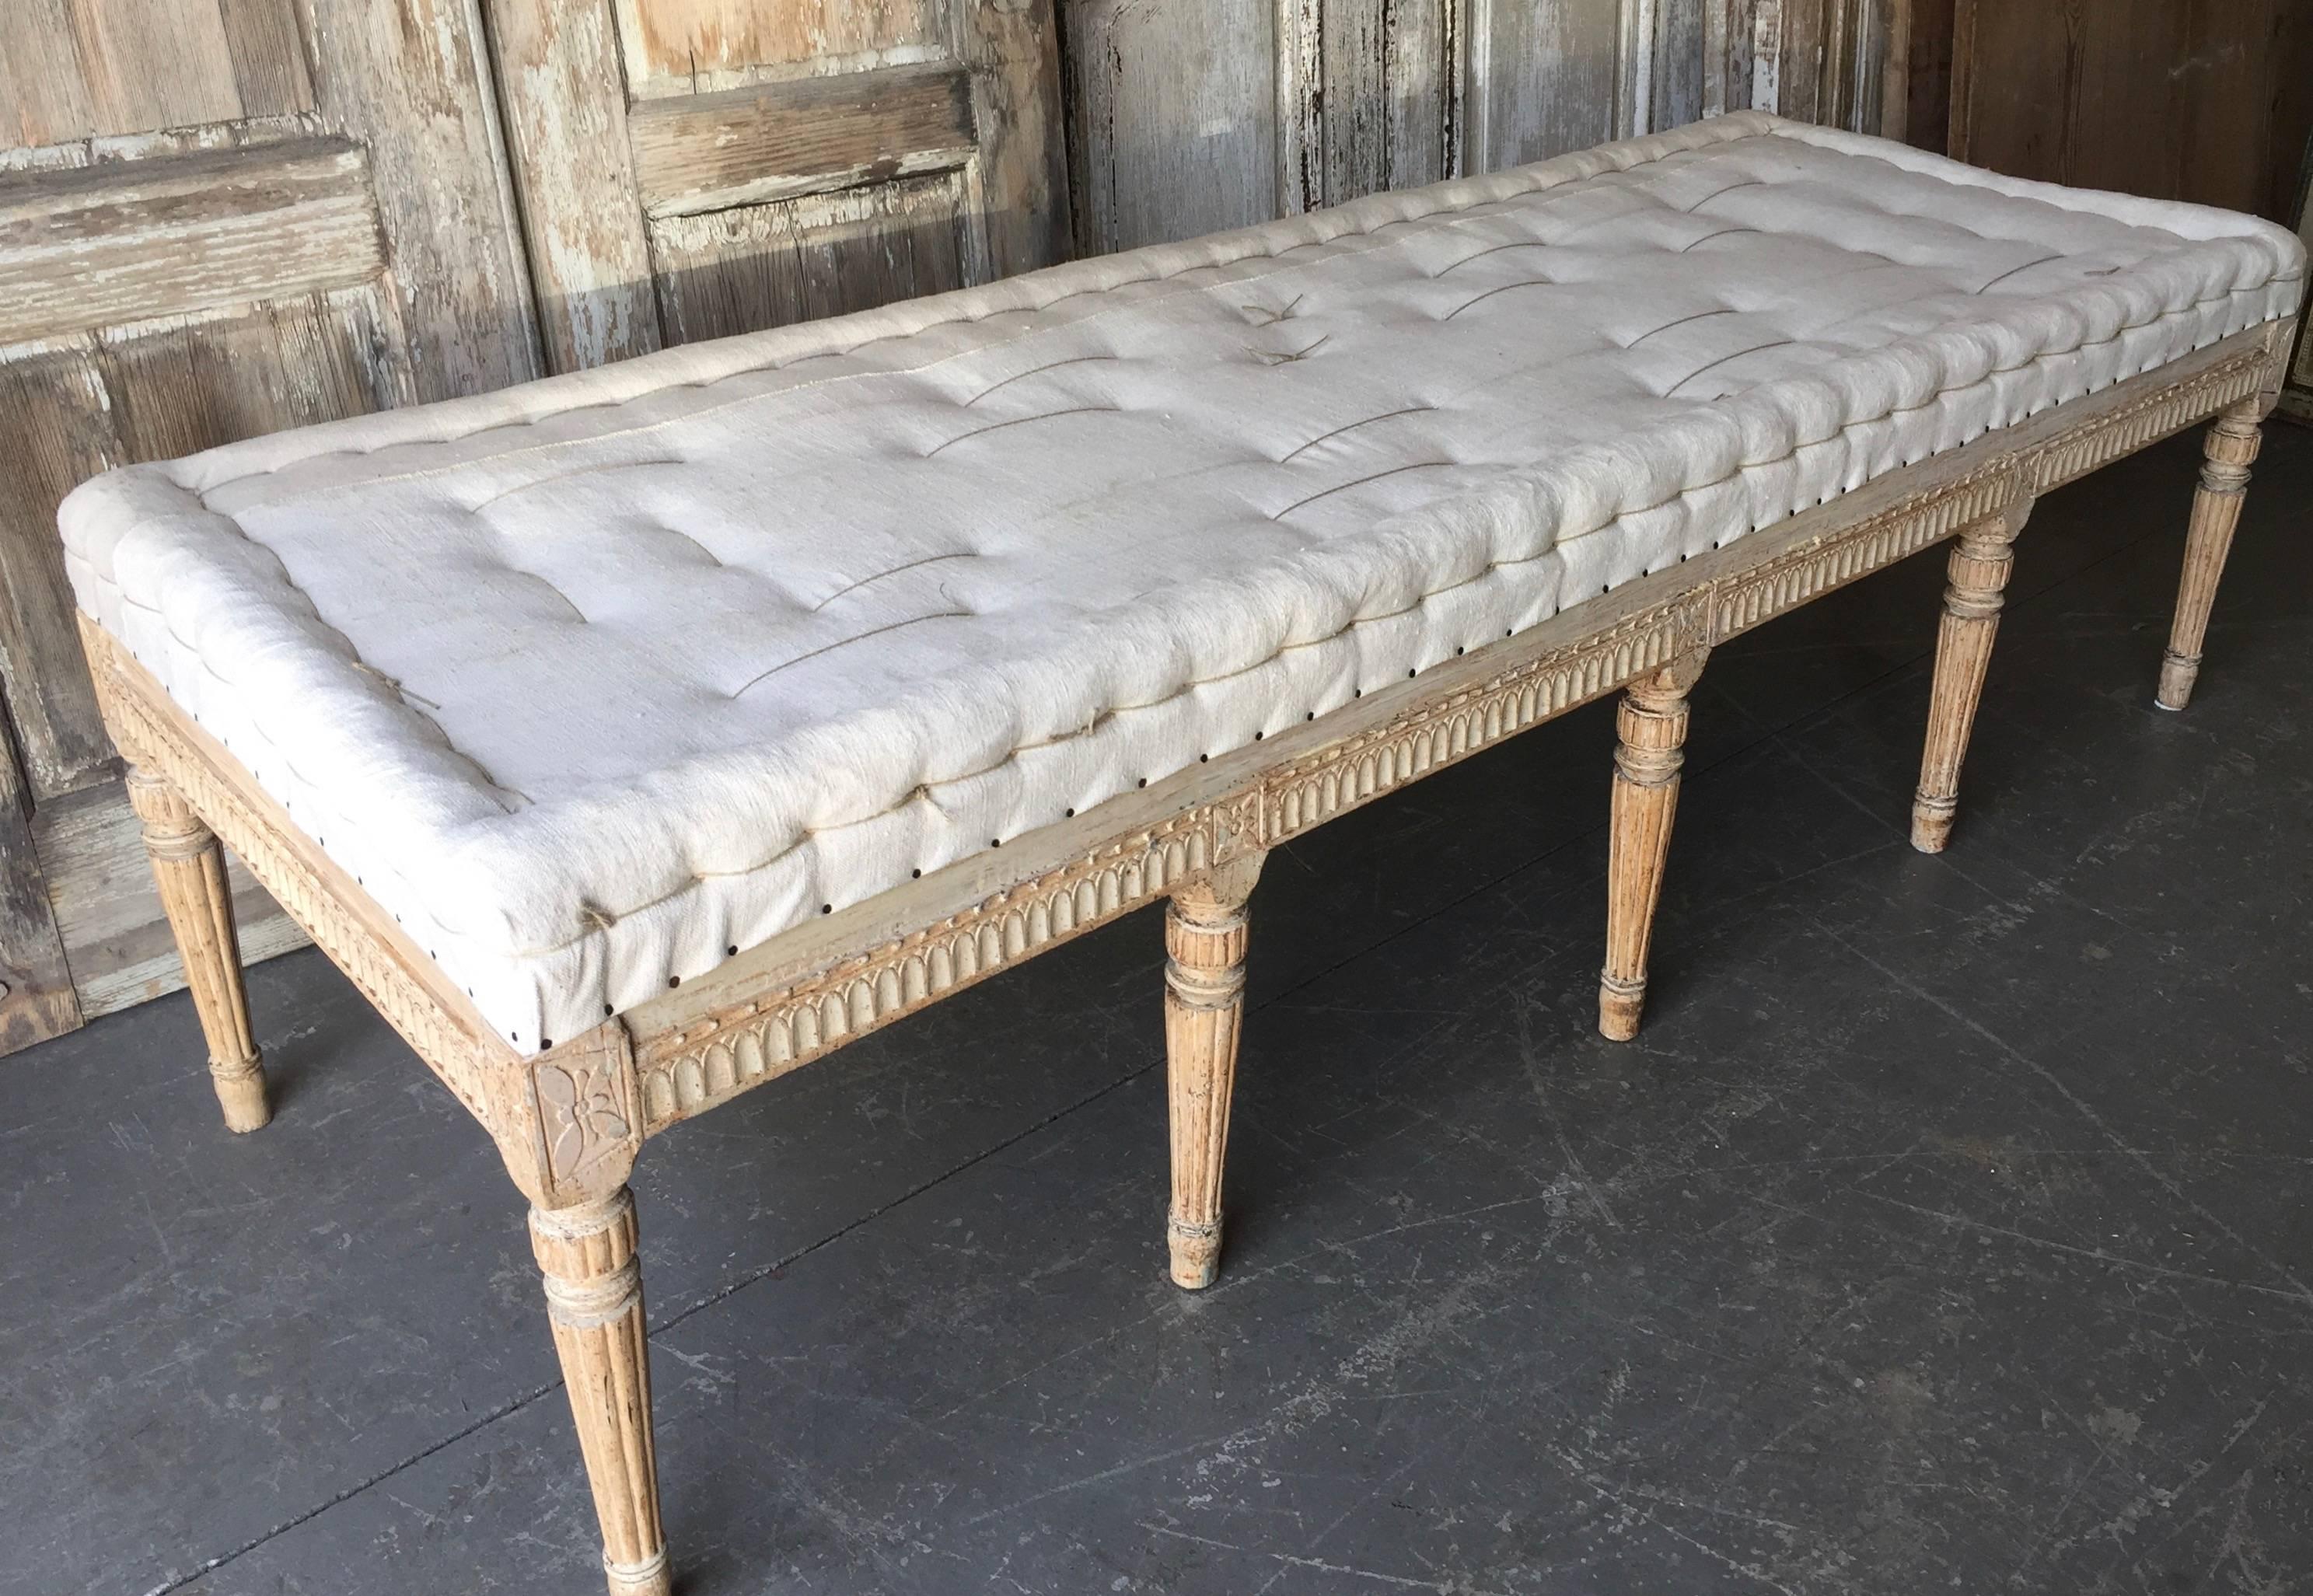 Swedish Gustavian period bench, circa 1800, finished on three sides with leaf rod and rosette carvings on carved round fluted legs. Scraped to original cream white finish and upholstered in traditional way in antique hand-stitched linen. Timeless